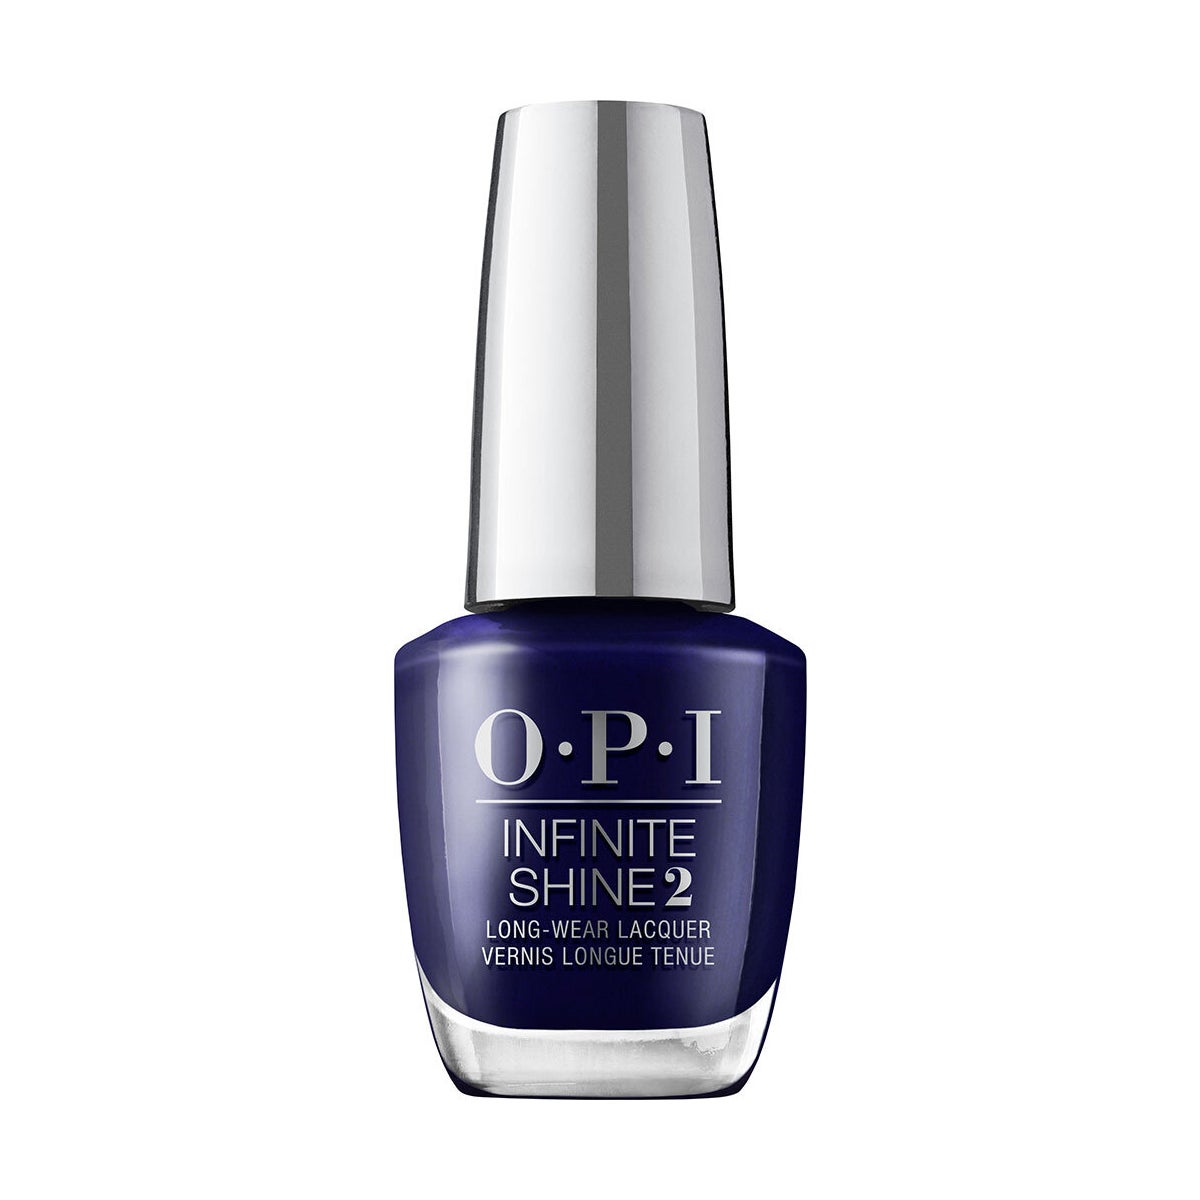 OPI Infinite Shine - Award For Best Nails Goes Toâ€¦